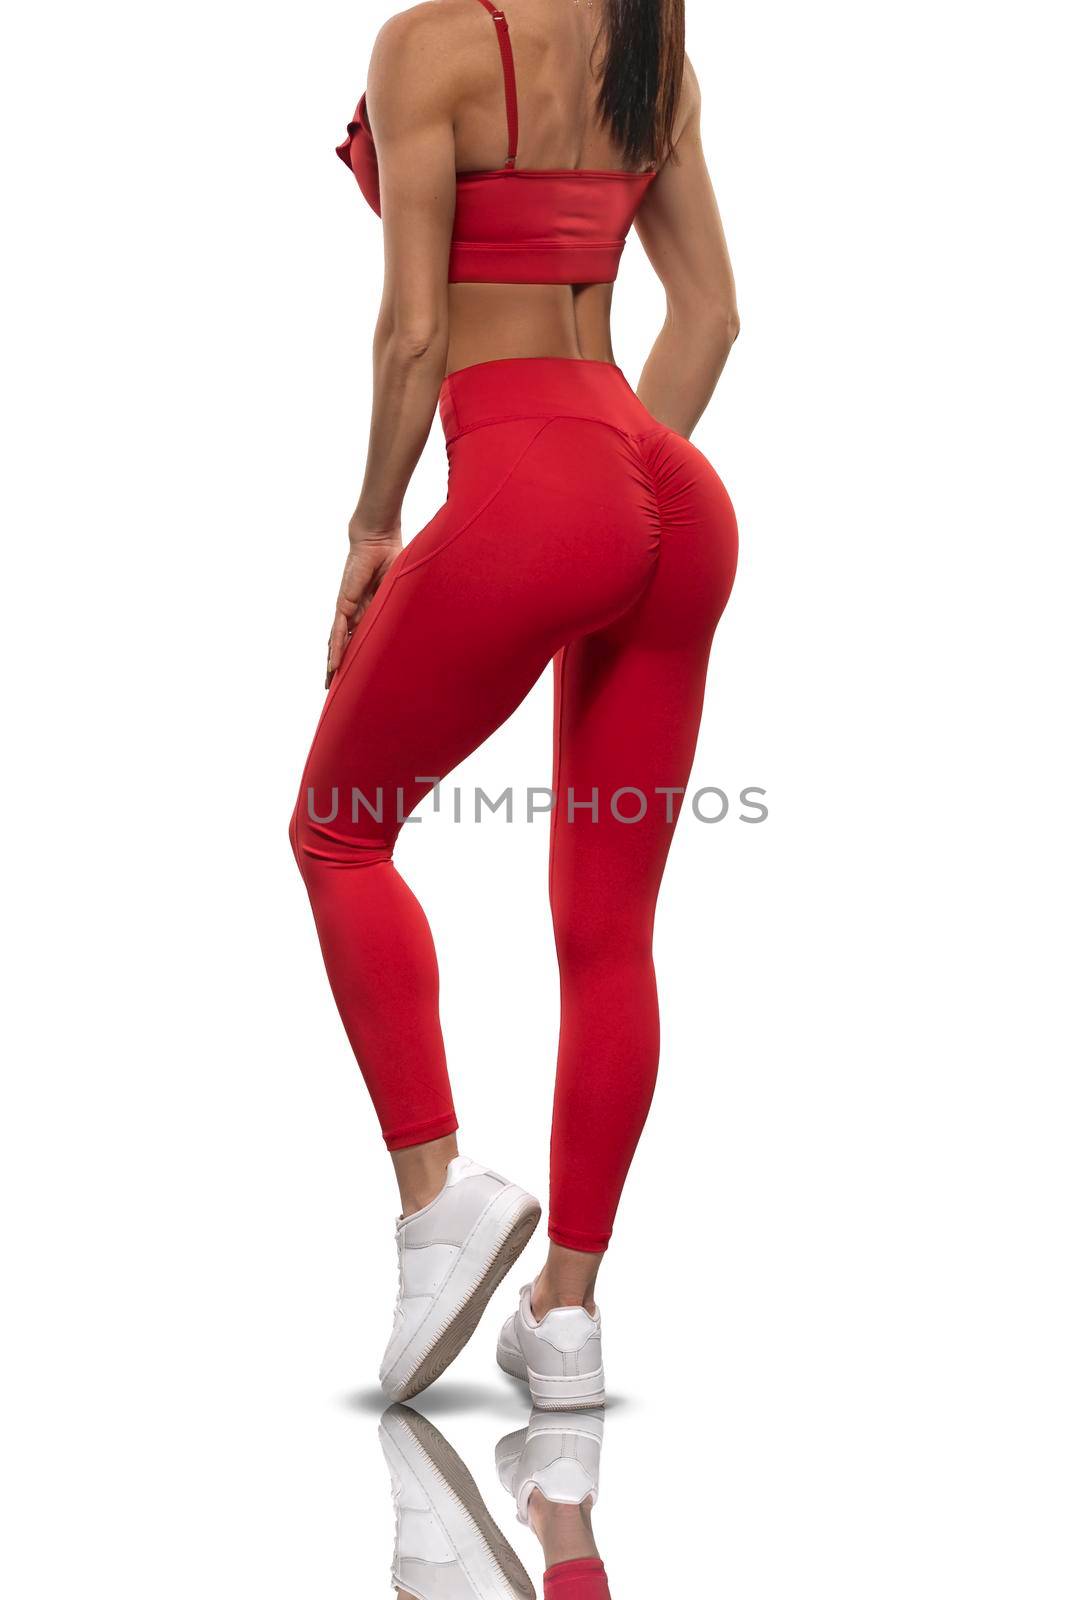 legs brunette girl in red leggings and a top stay back on a white background